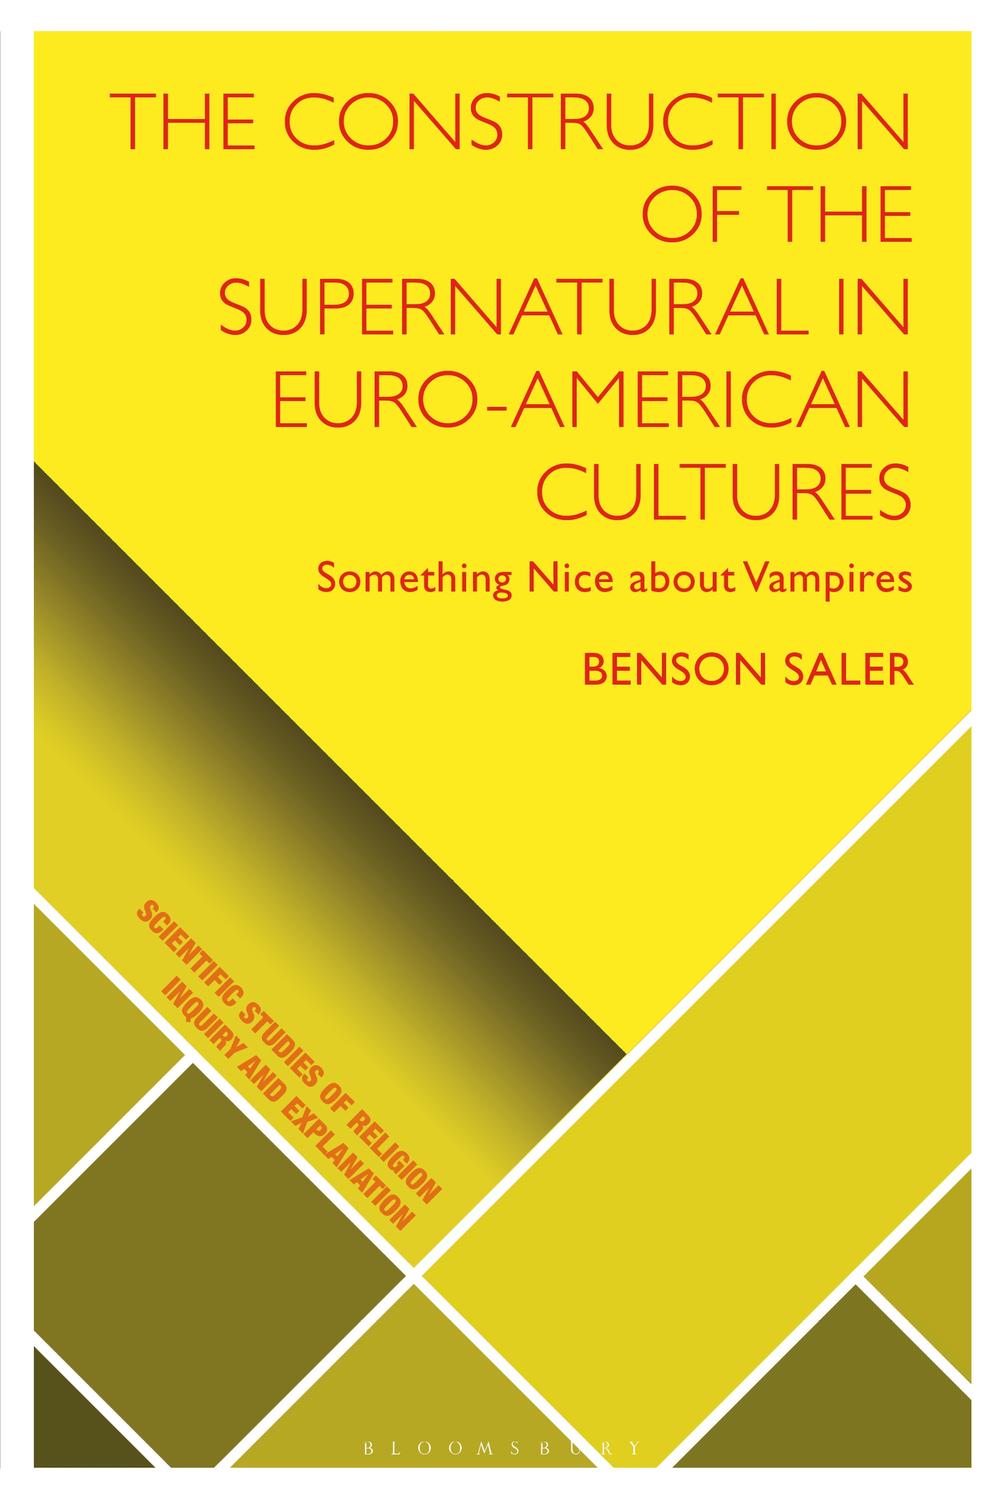 The Construction of the Supernatural in Euro-American Cultures - Benson Saler